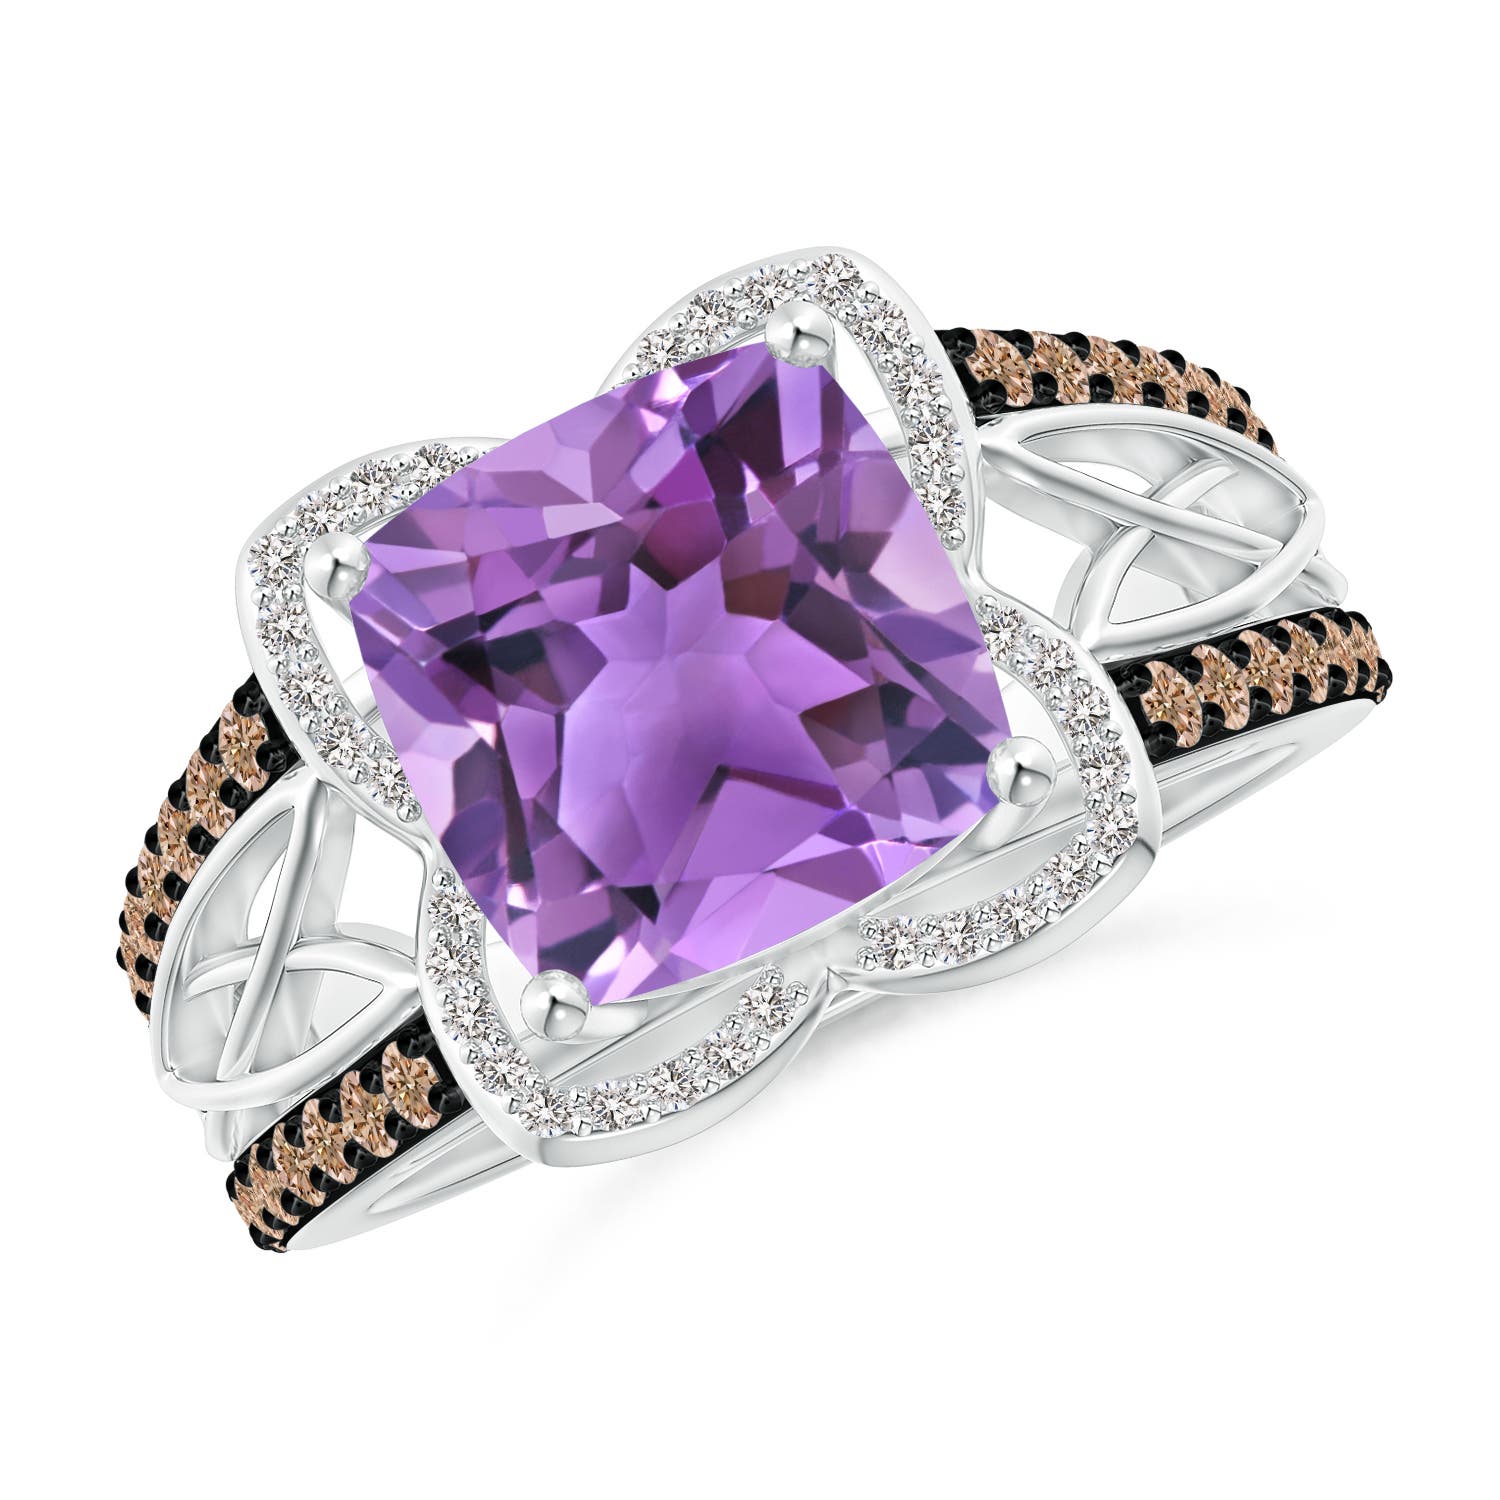 AA - Amethyst / 3.61 CT / 14 KT White Gold